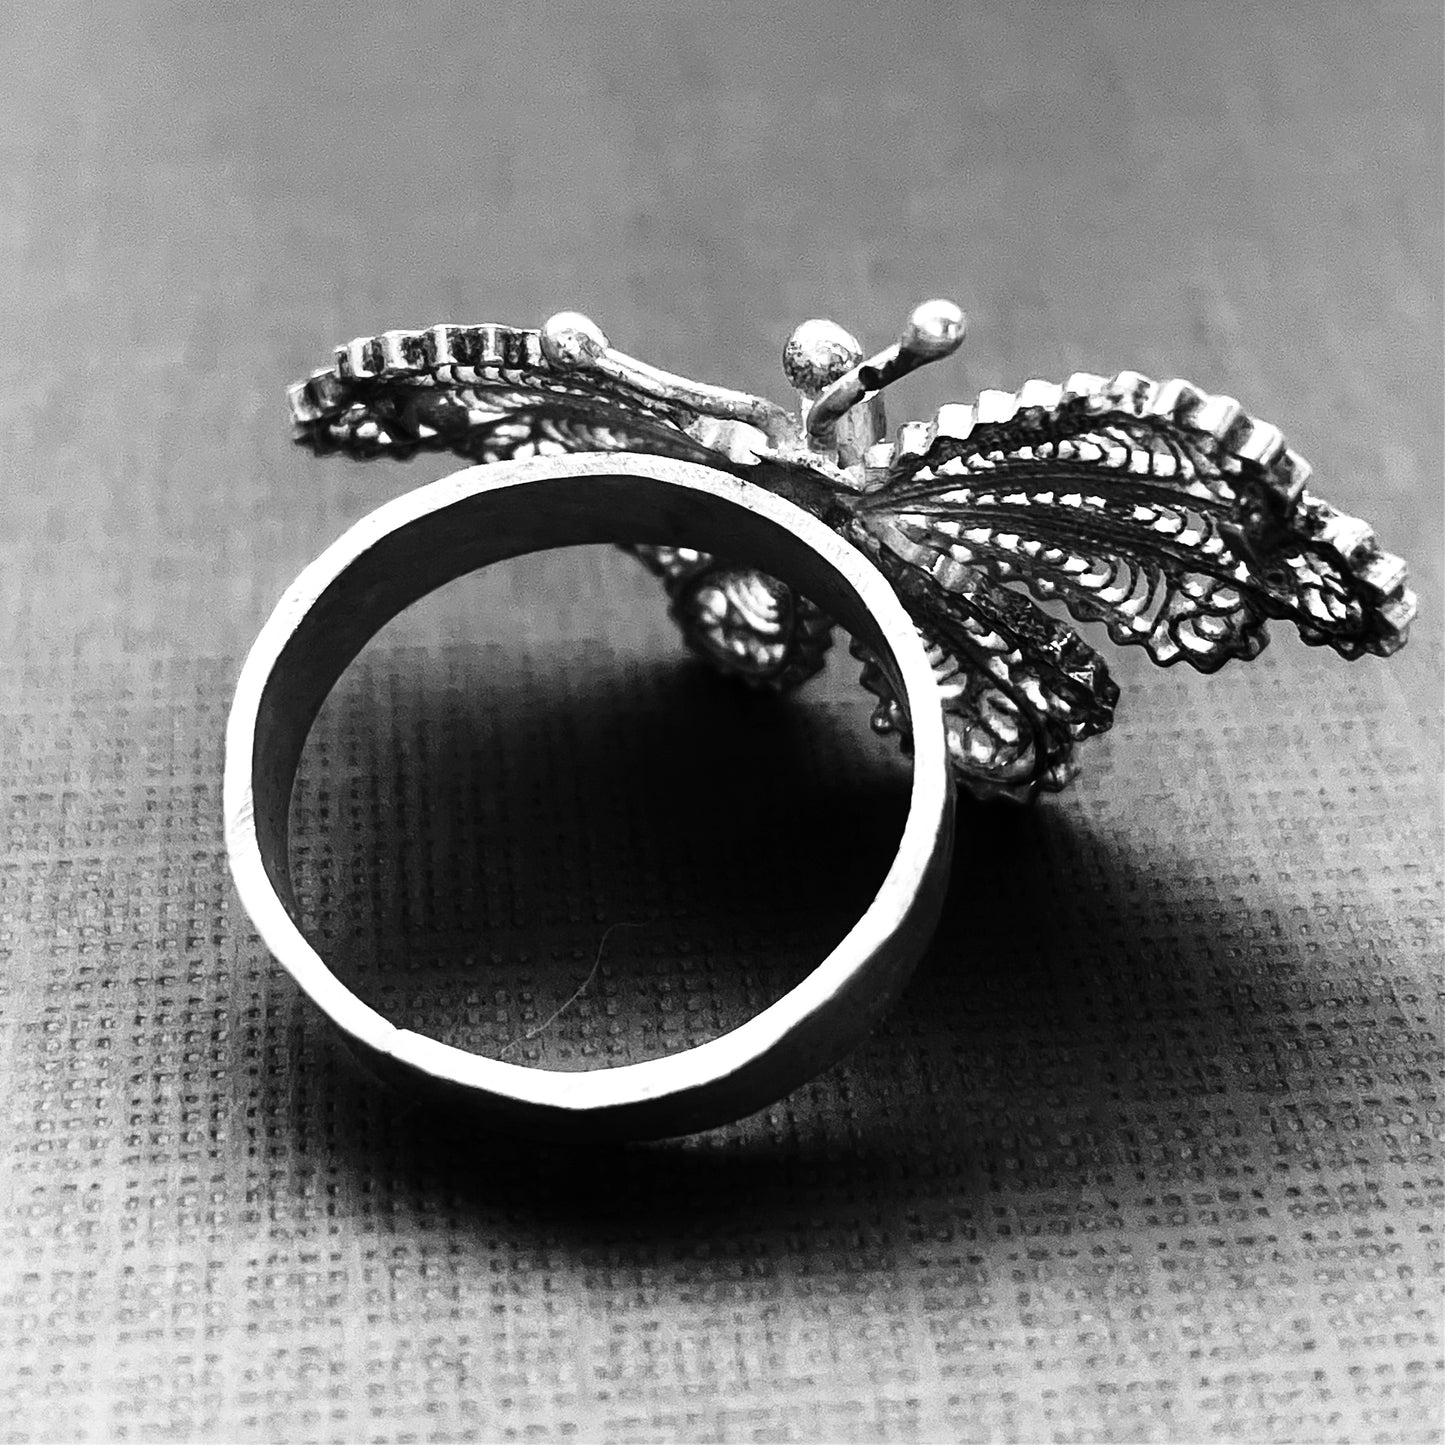 The bsck view showing a solid silver band ring topped with antique butterfly made of hundreds of coiled silver strands. 